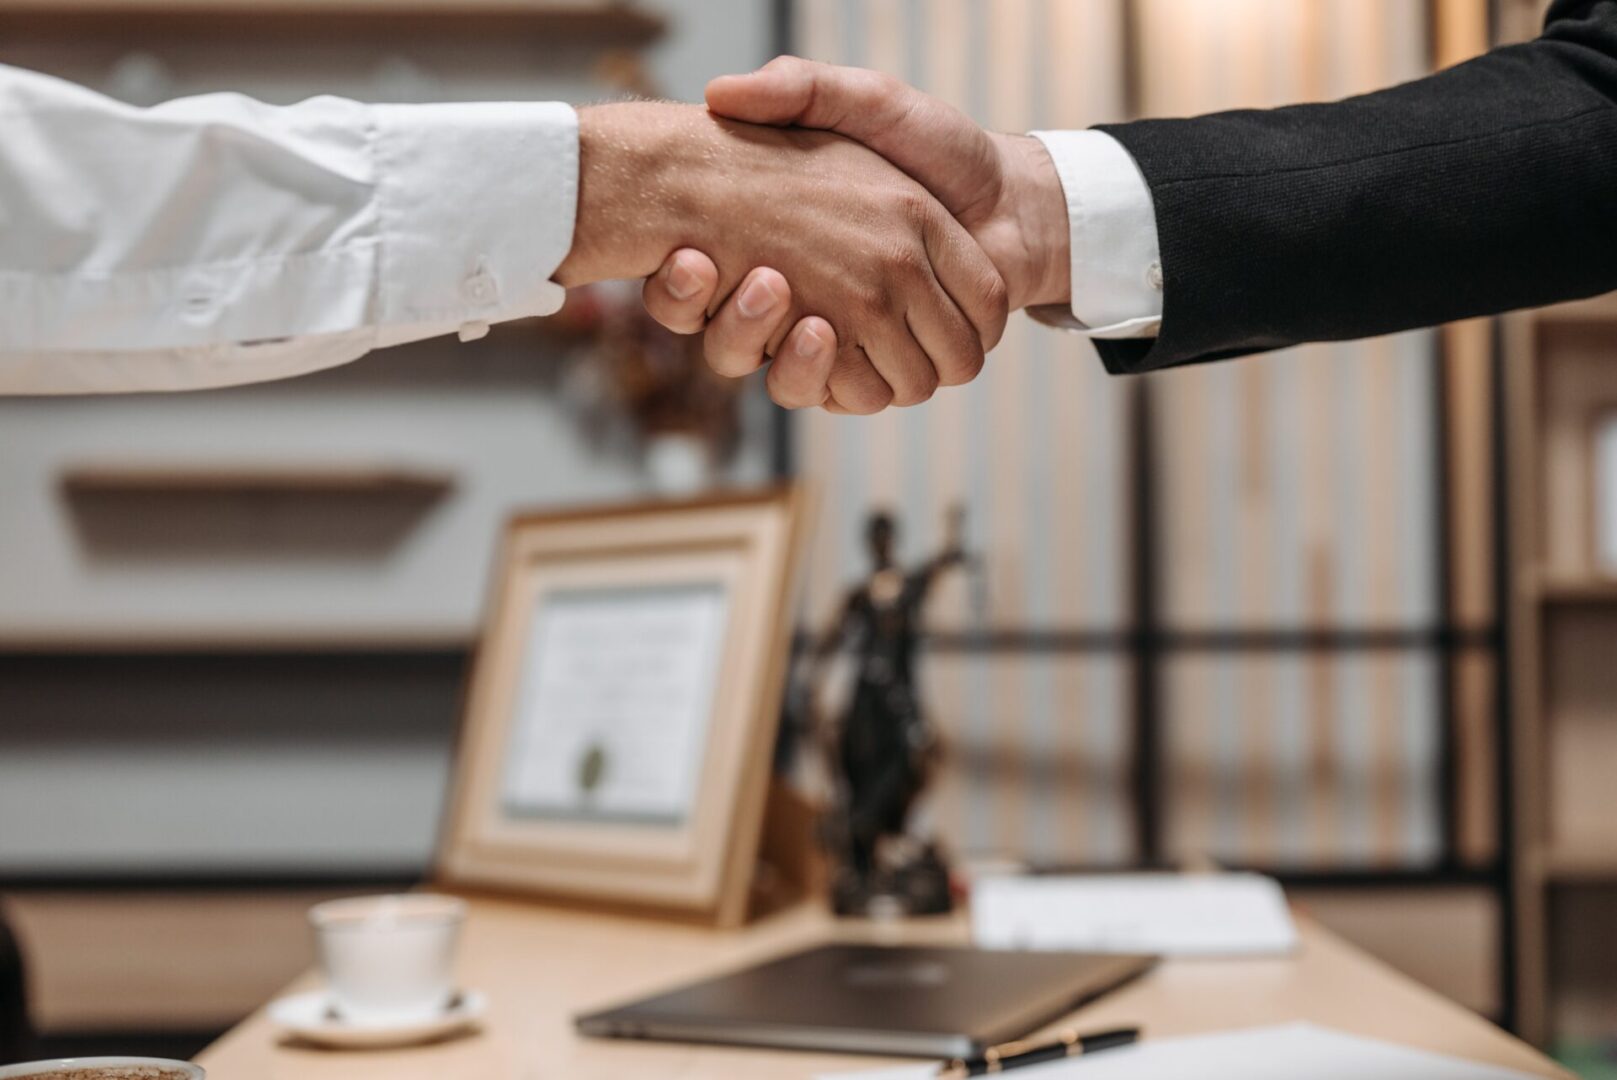 Two people shaking hands over a desk.